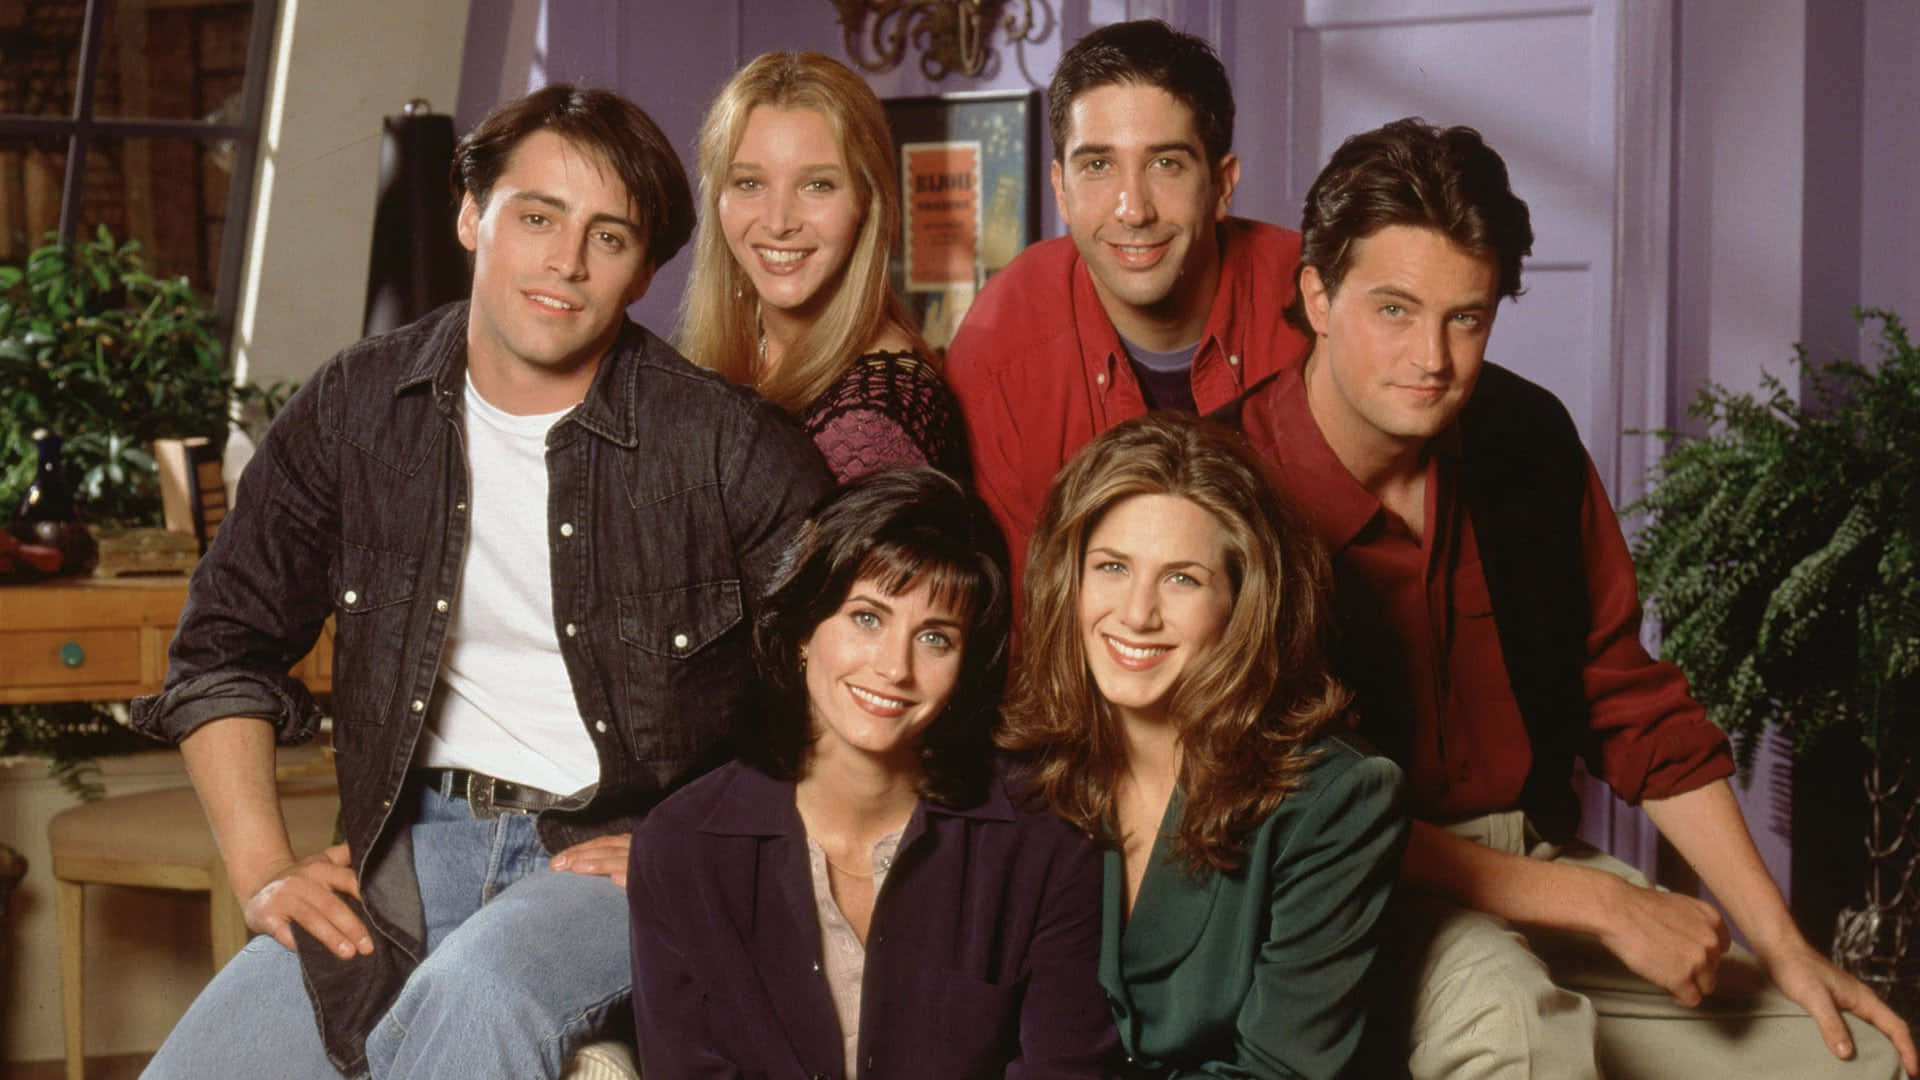 “Friends – The Most Iconic Comedy Series!”